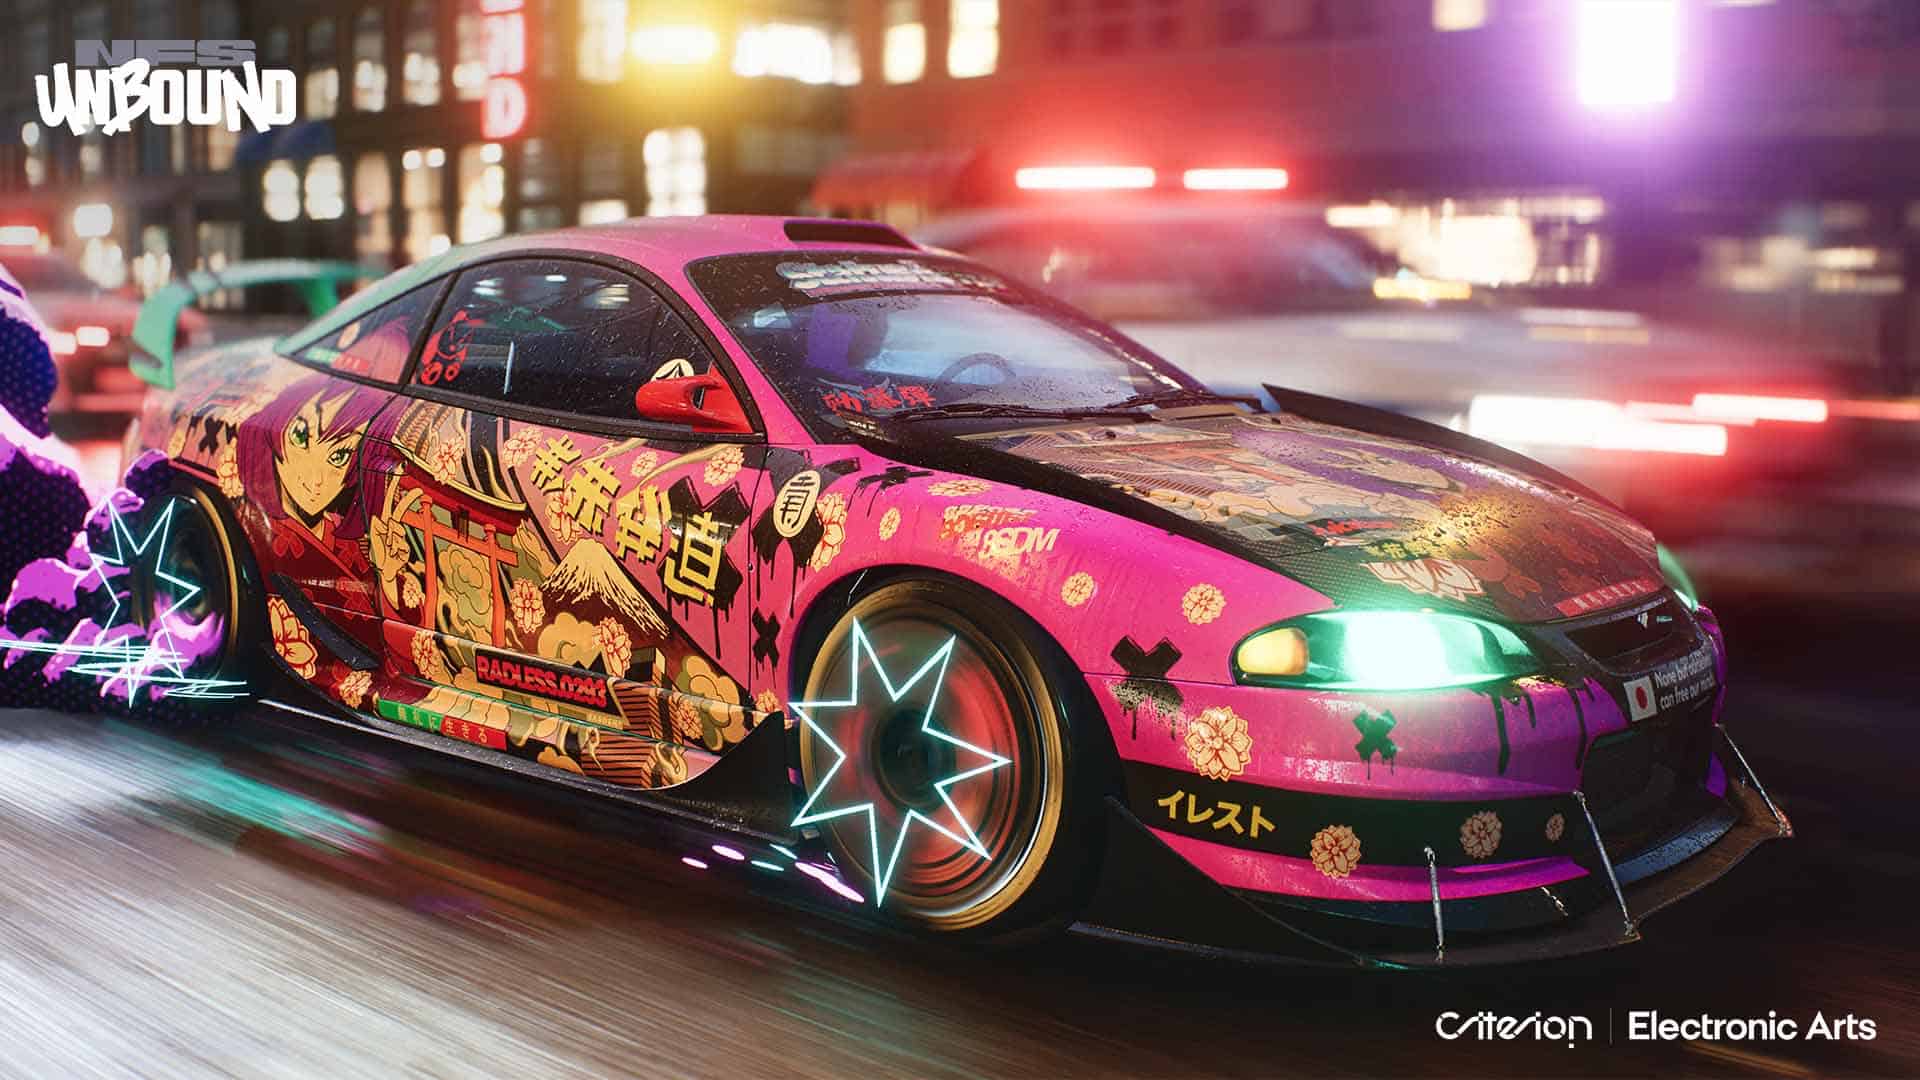 Need for Speed Unbound – release date, pre-order bonuses & more *UPDATED*